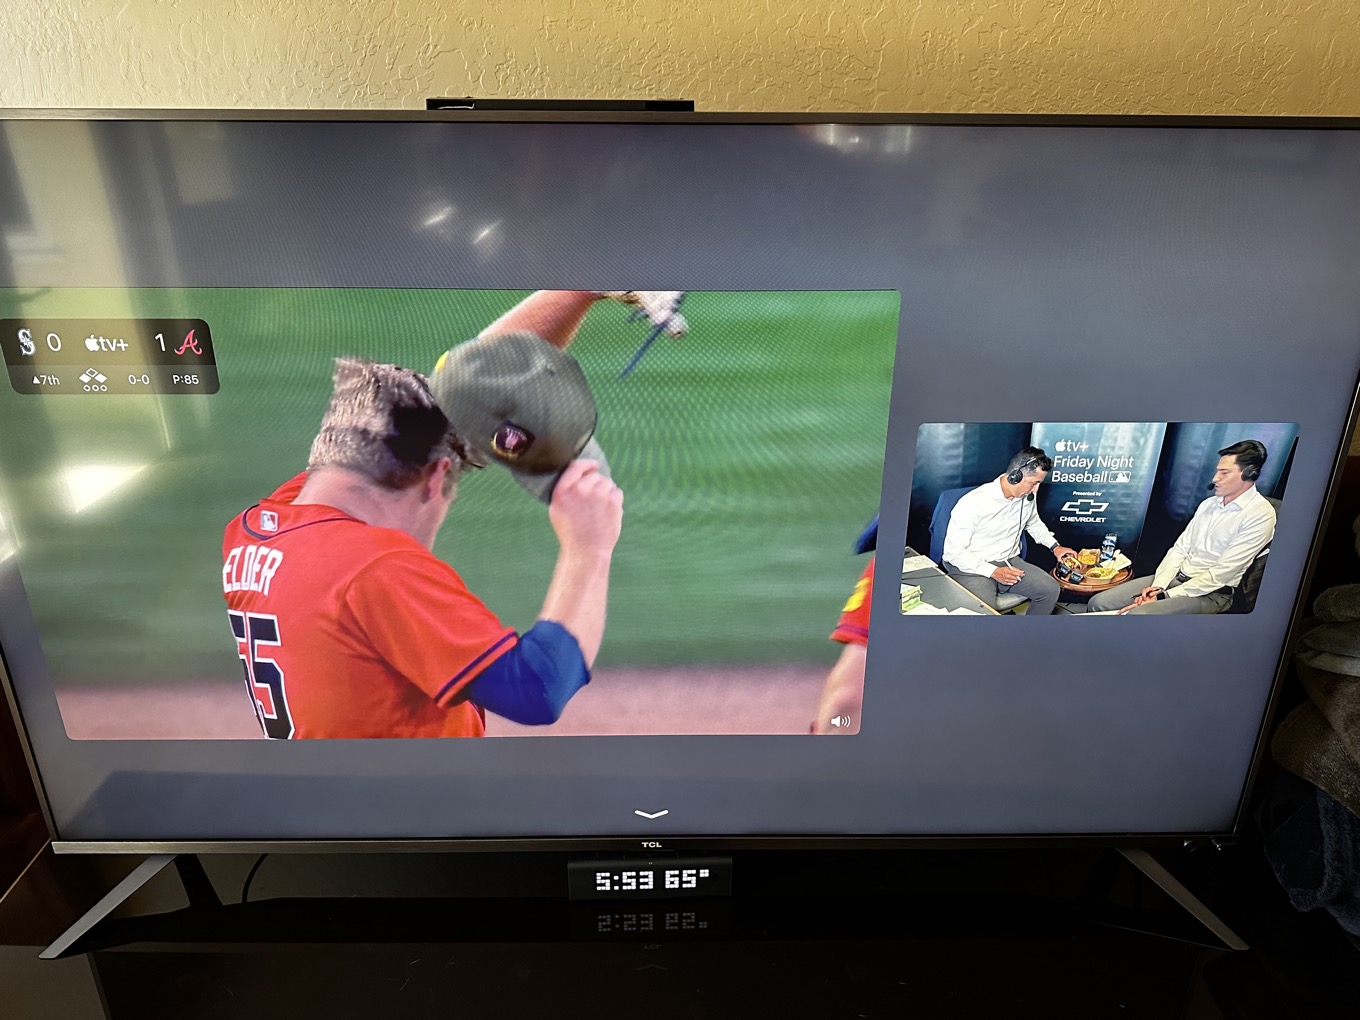 Apple TVs multiview feature is so good, I want it everywhere